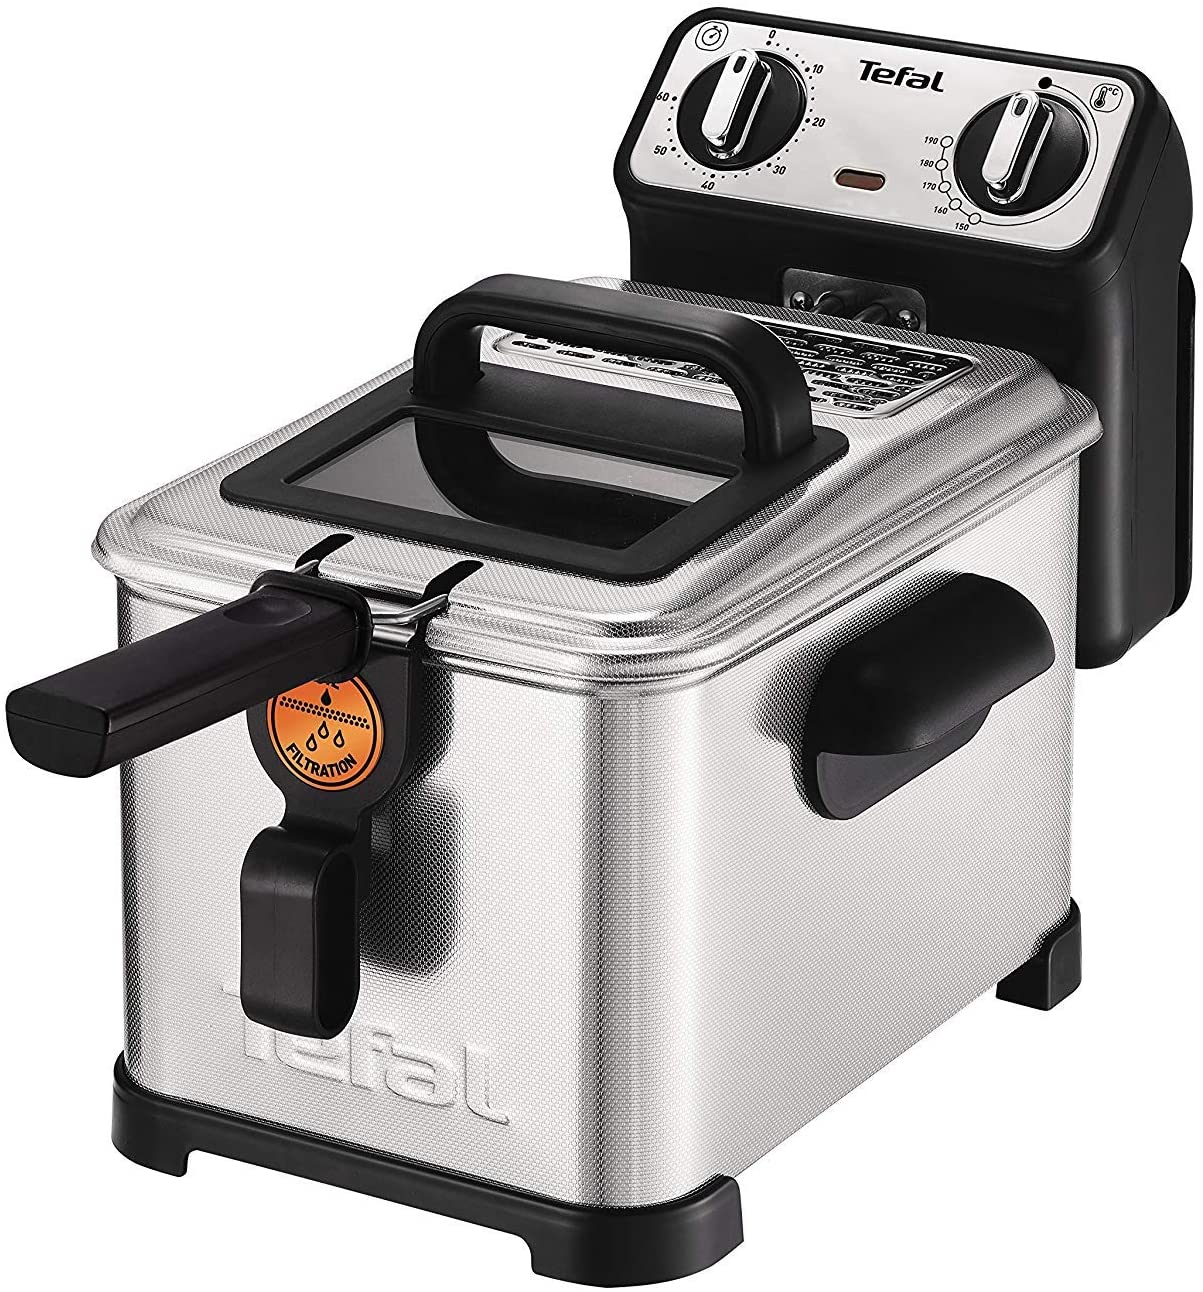 Tefal FR5101 deep fryer Filtra Pro Inox and Design, timer, heat-insulated, 